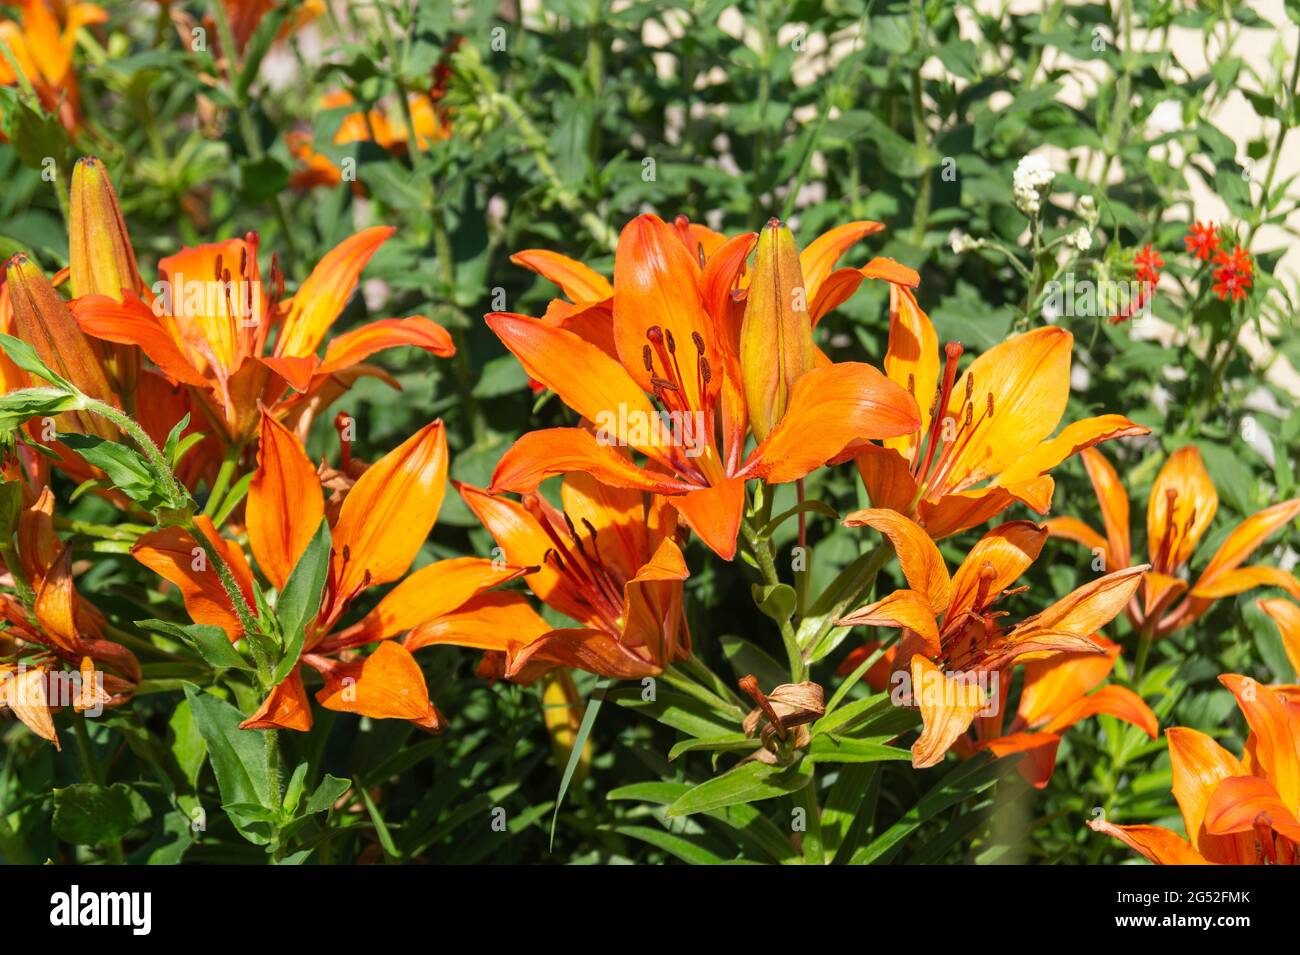 A lily flower in the garden on a background of green leaves. Beautiful natural background on a sunny day Stock Photo